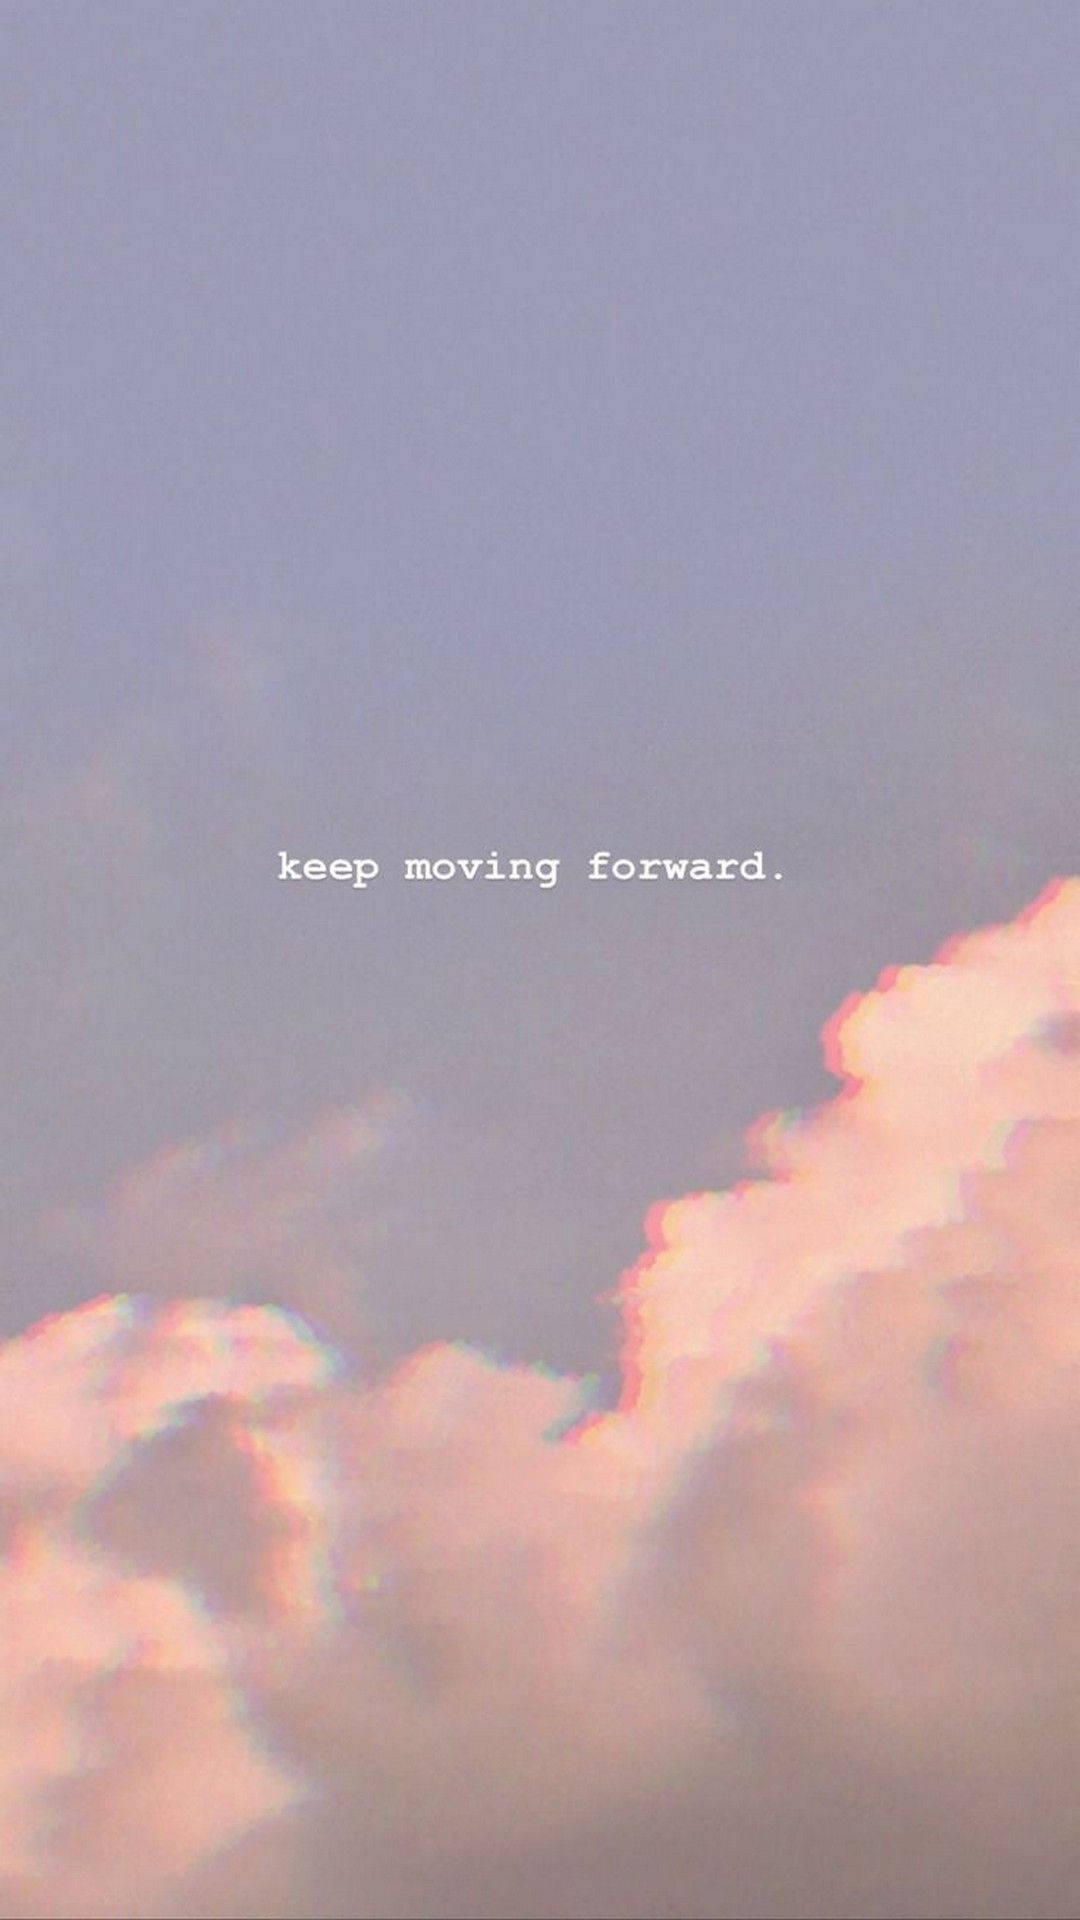 Keep Moving Forward Quote Aesthetic Tablet Wallpaper